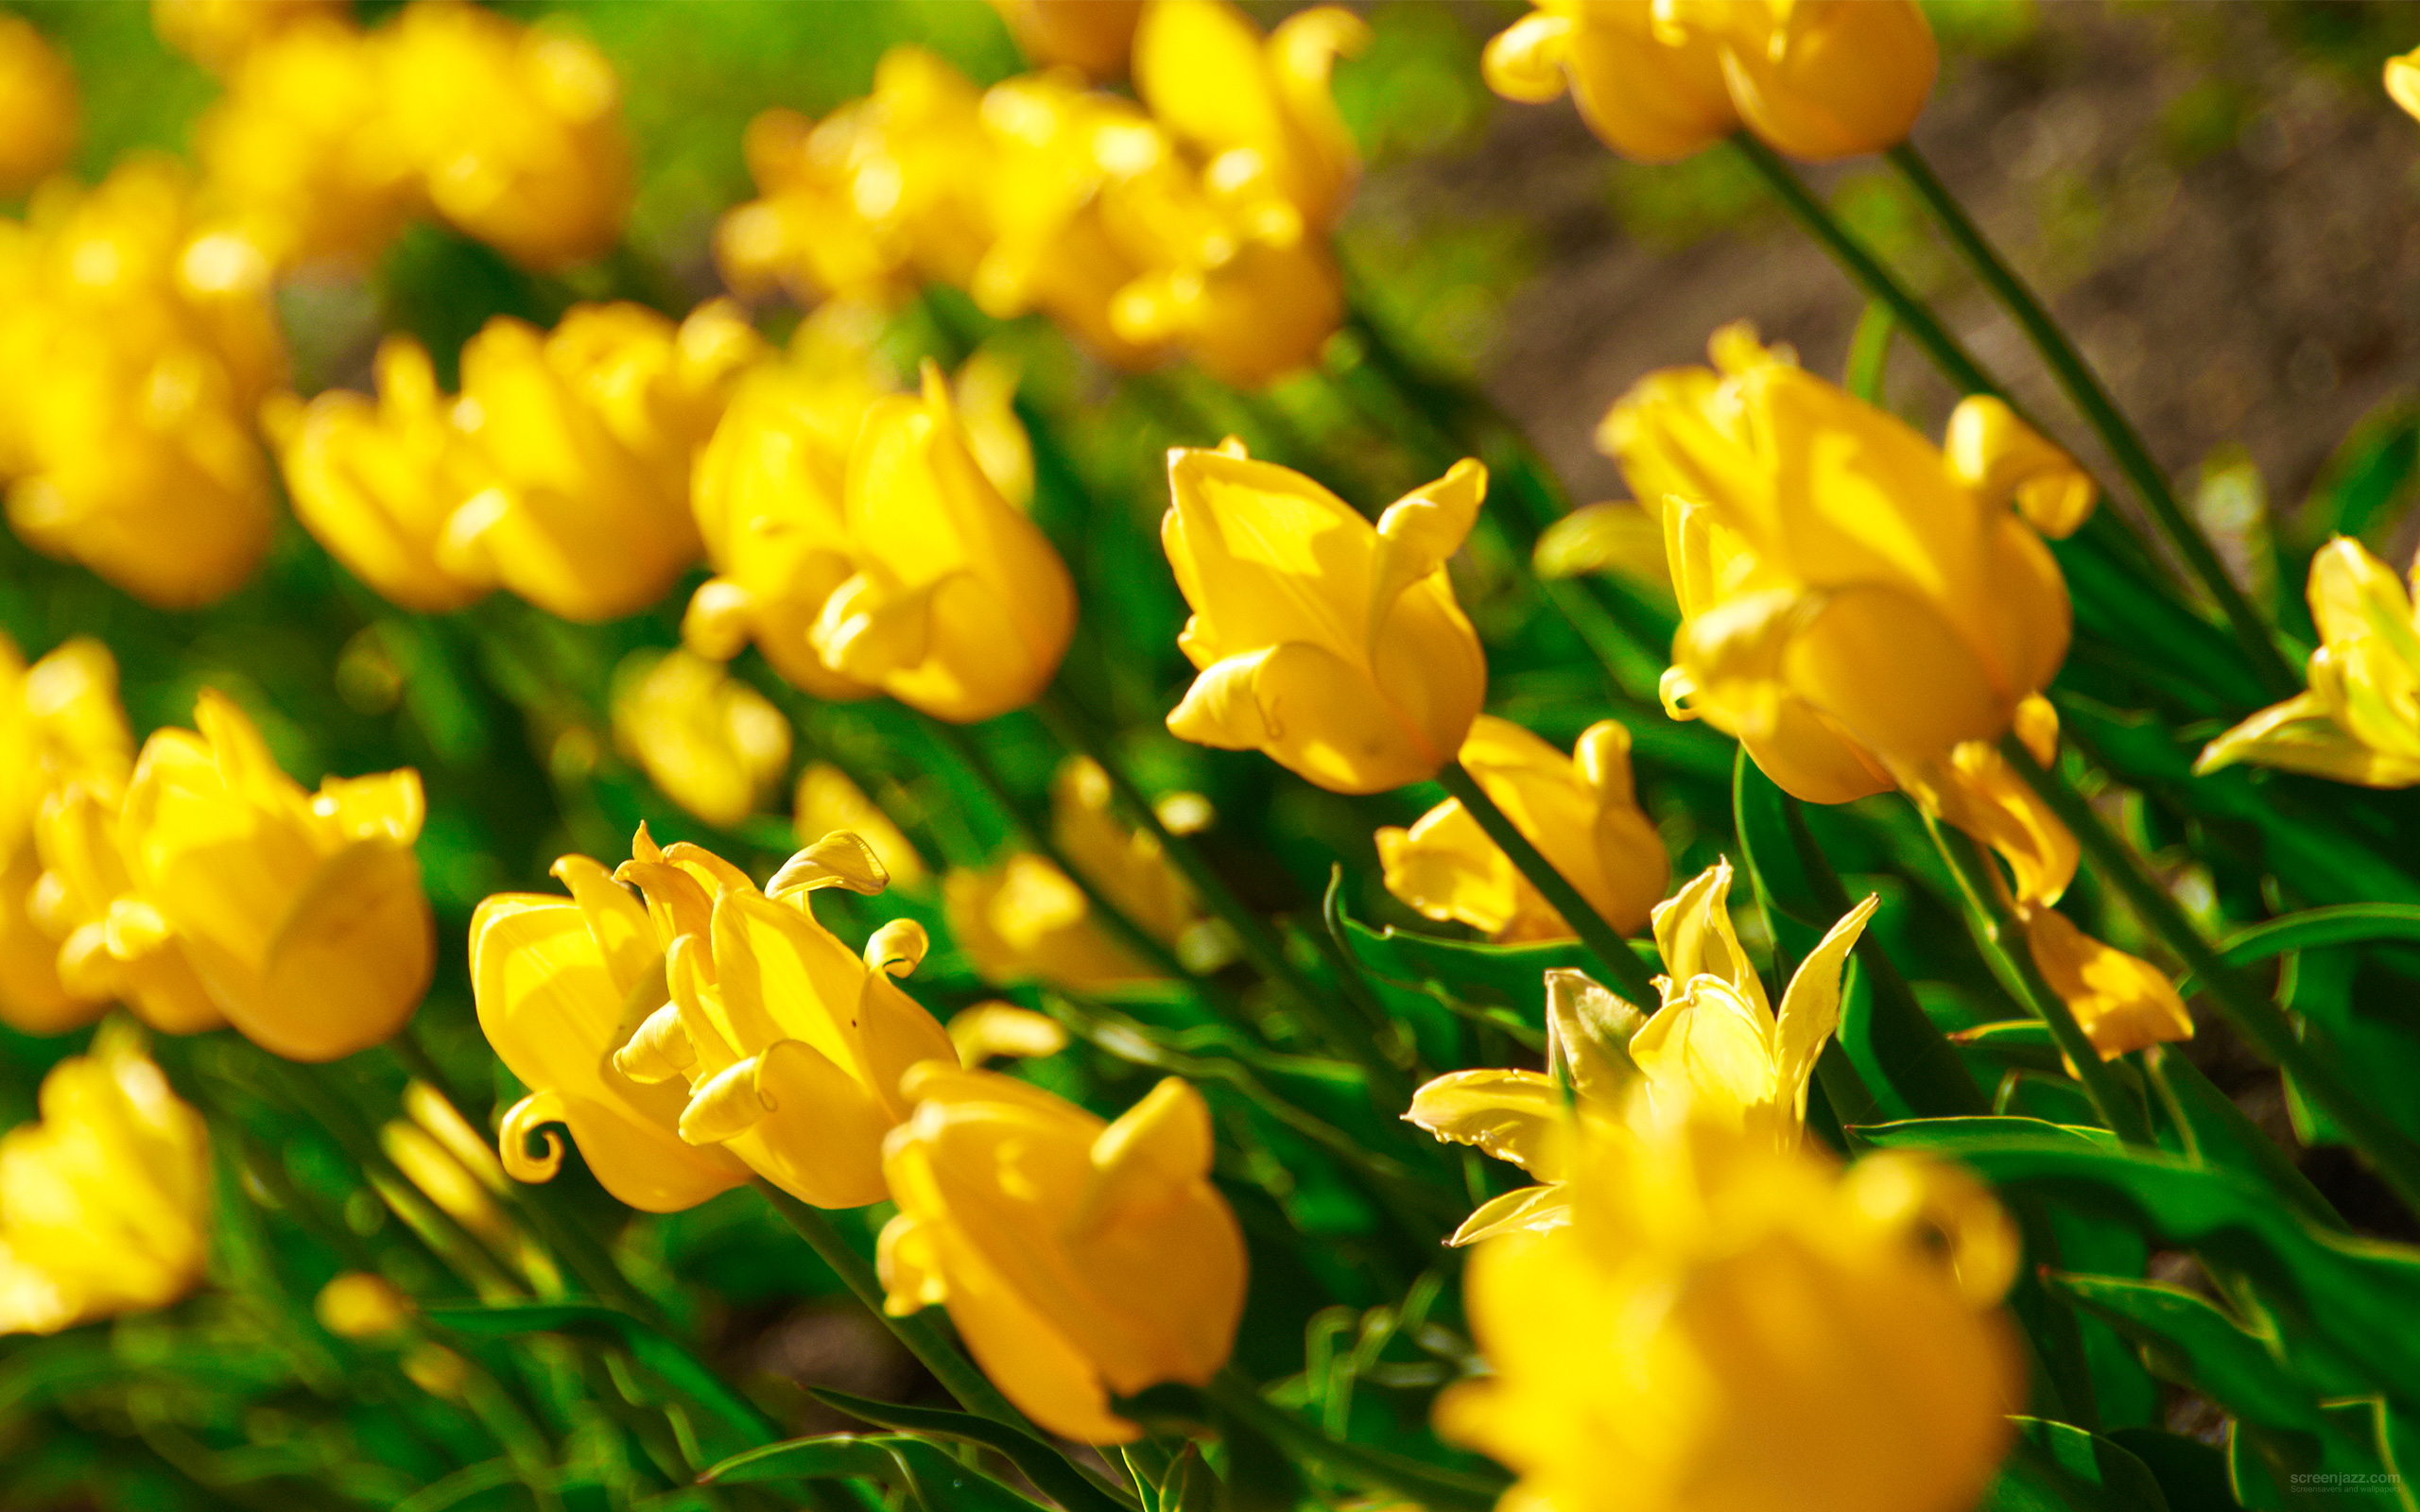 Yellow Tulips 2560x1600 Download High Quality Hd Wallpapers For Free